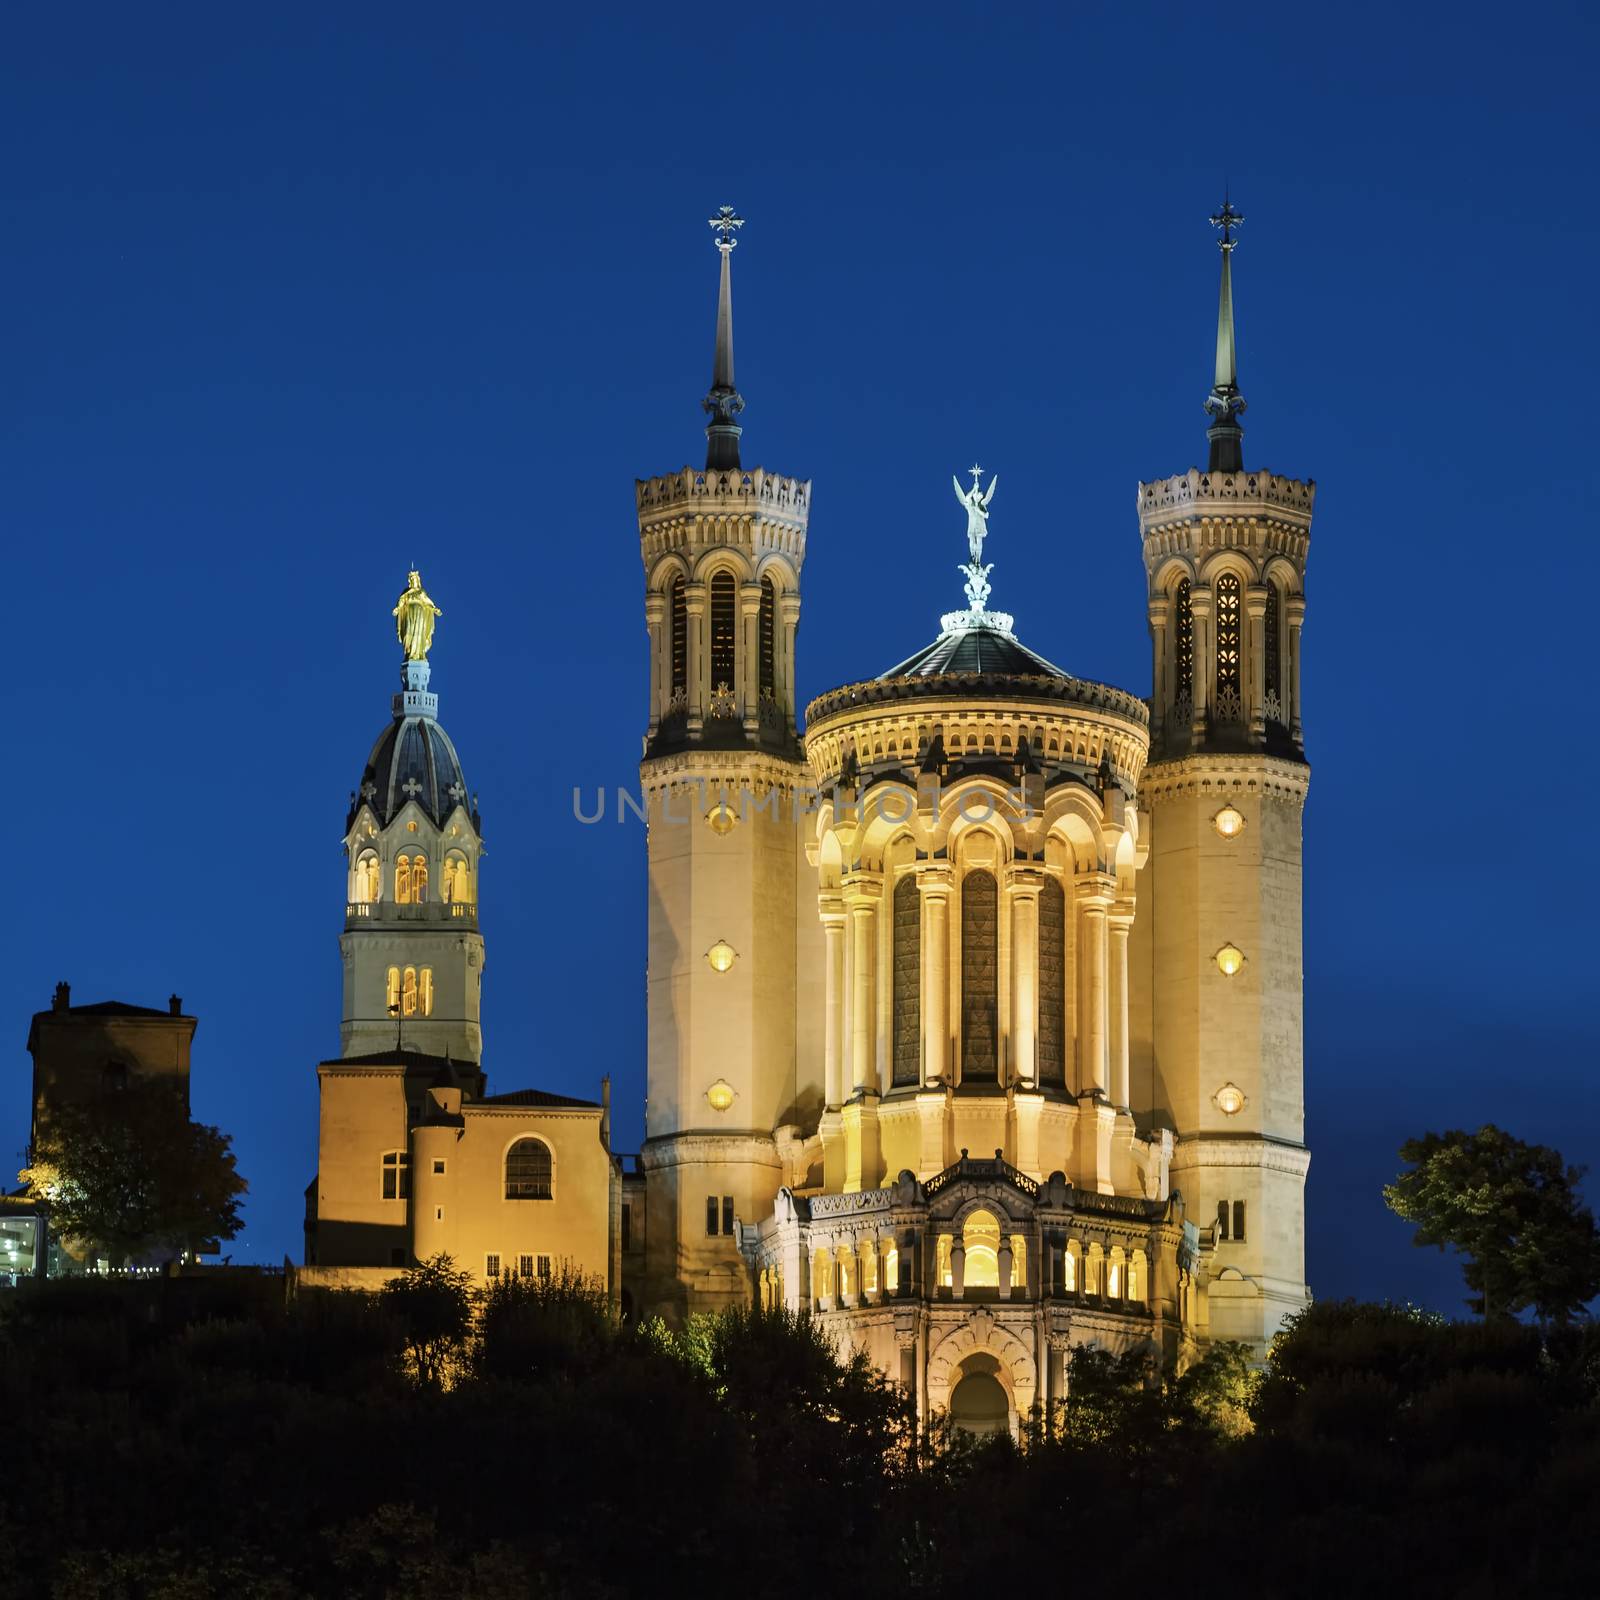 Basilica Notre Dame de fourviere in Lyon, France at night